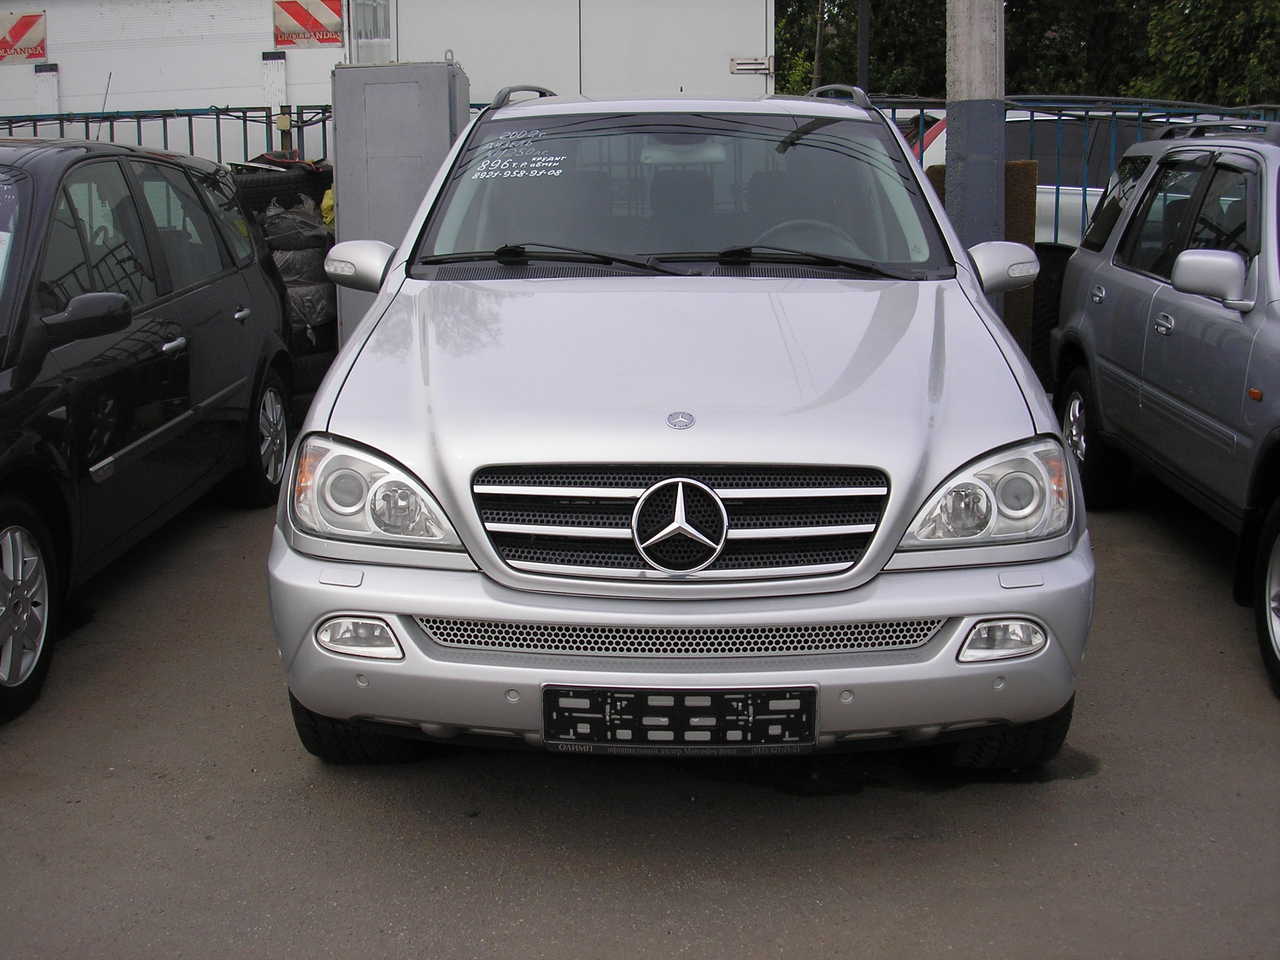 2002 Mercedes Benz Ml-class For Sale, 4.0, Diesel, Automatic For Sale